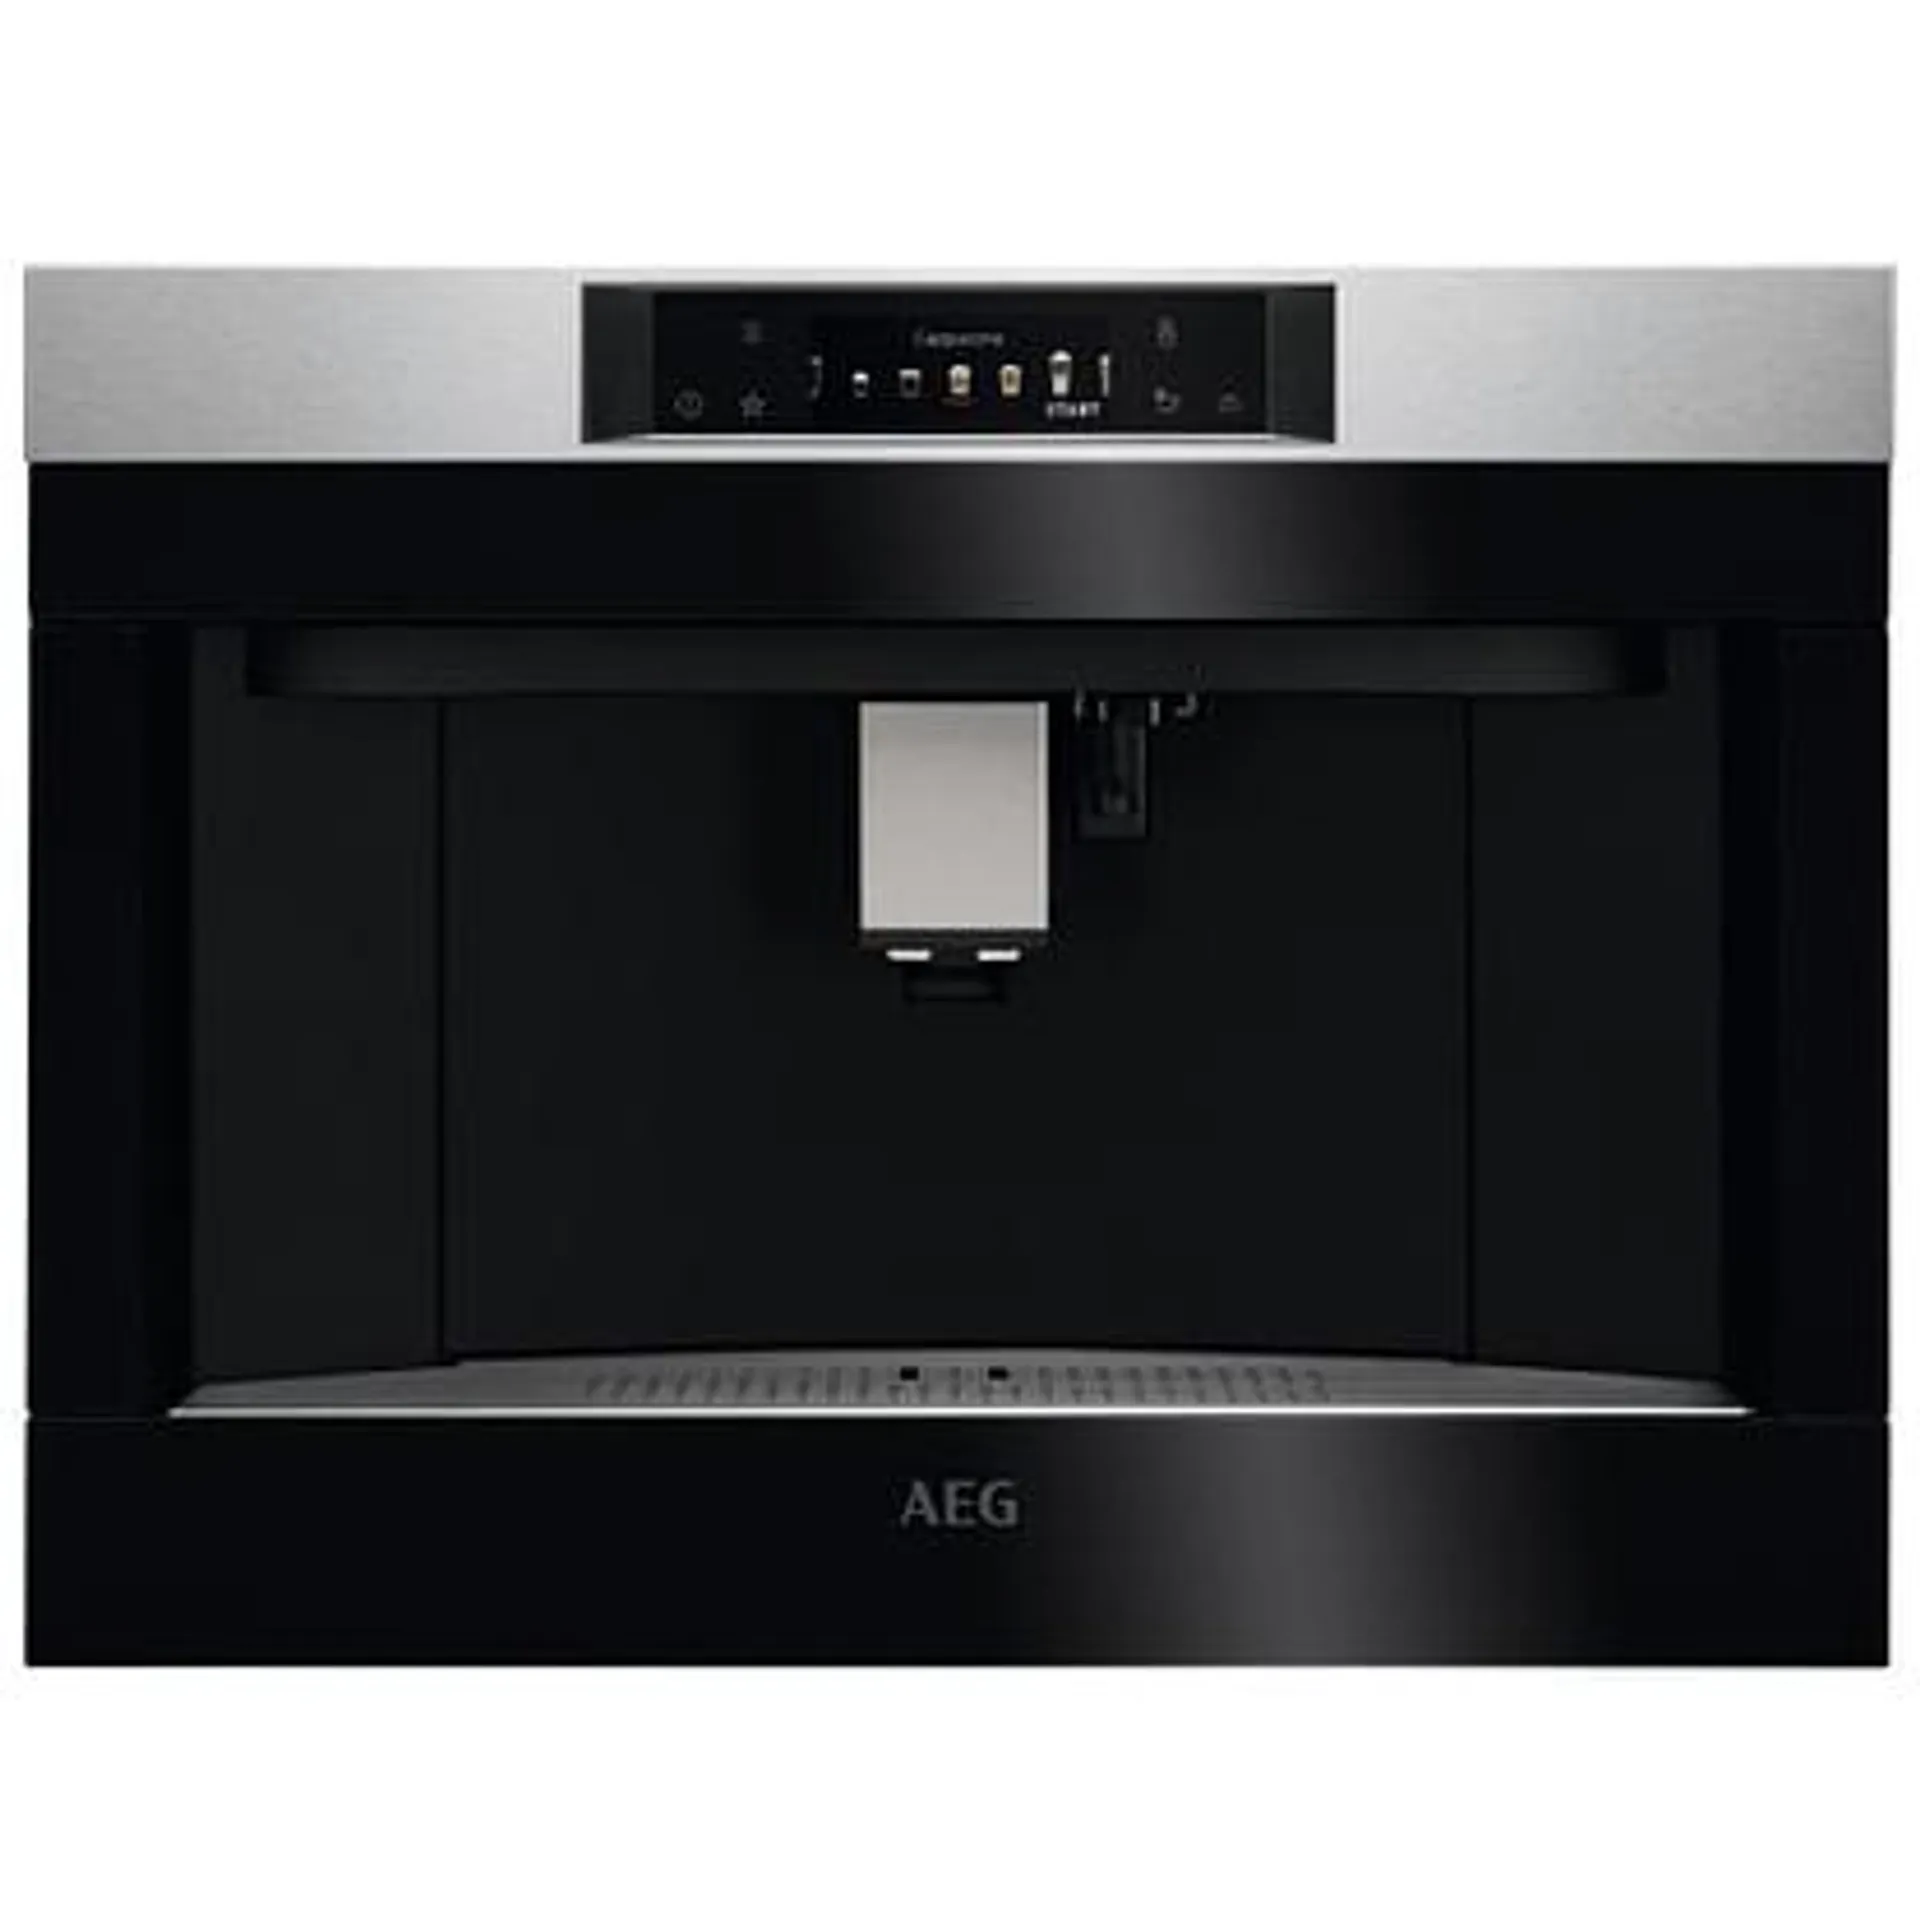 AEG KKA894500M 45cm Fully Automatic Built In Coffee Machine – STAINLESS STEEL